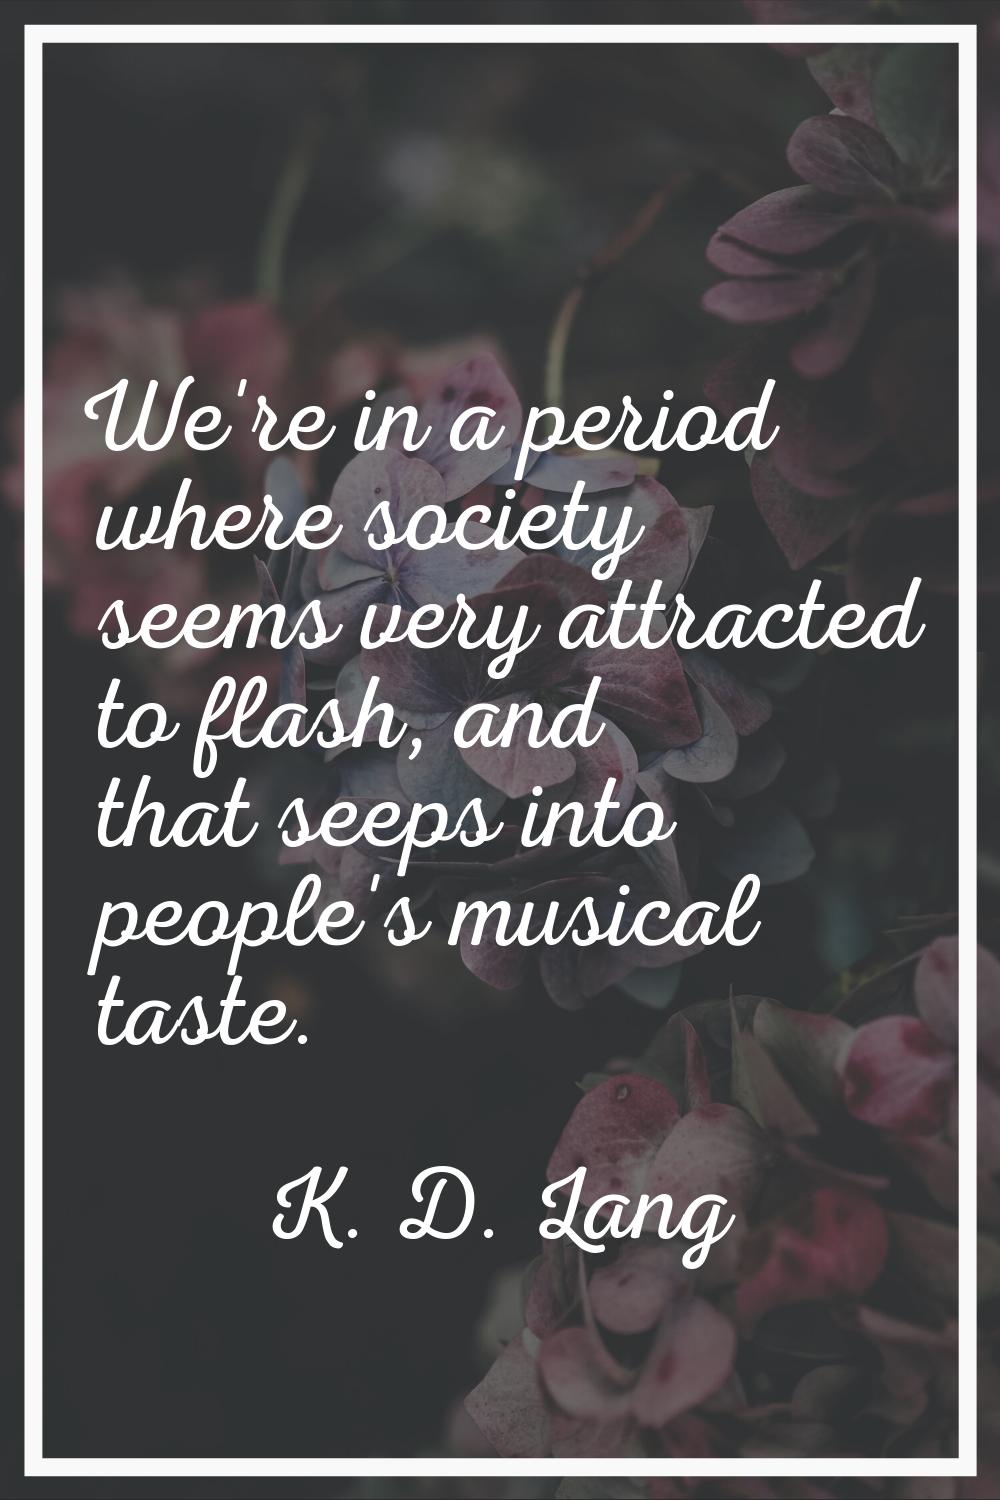 We're in a period where society seems very attracted to flash, and that seeps into people's musical